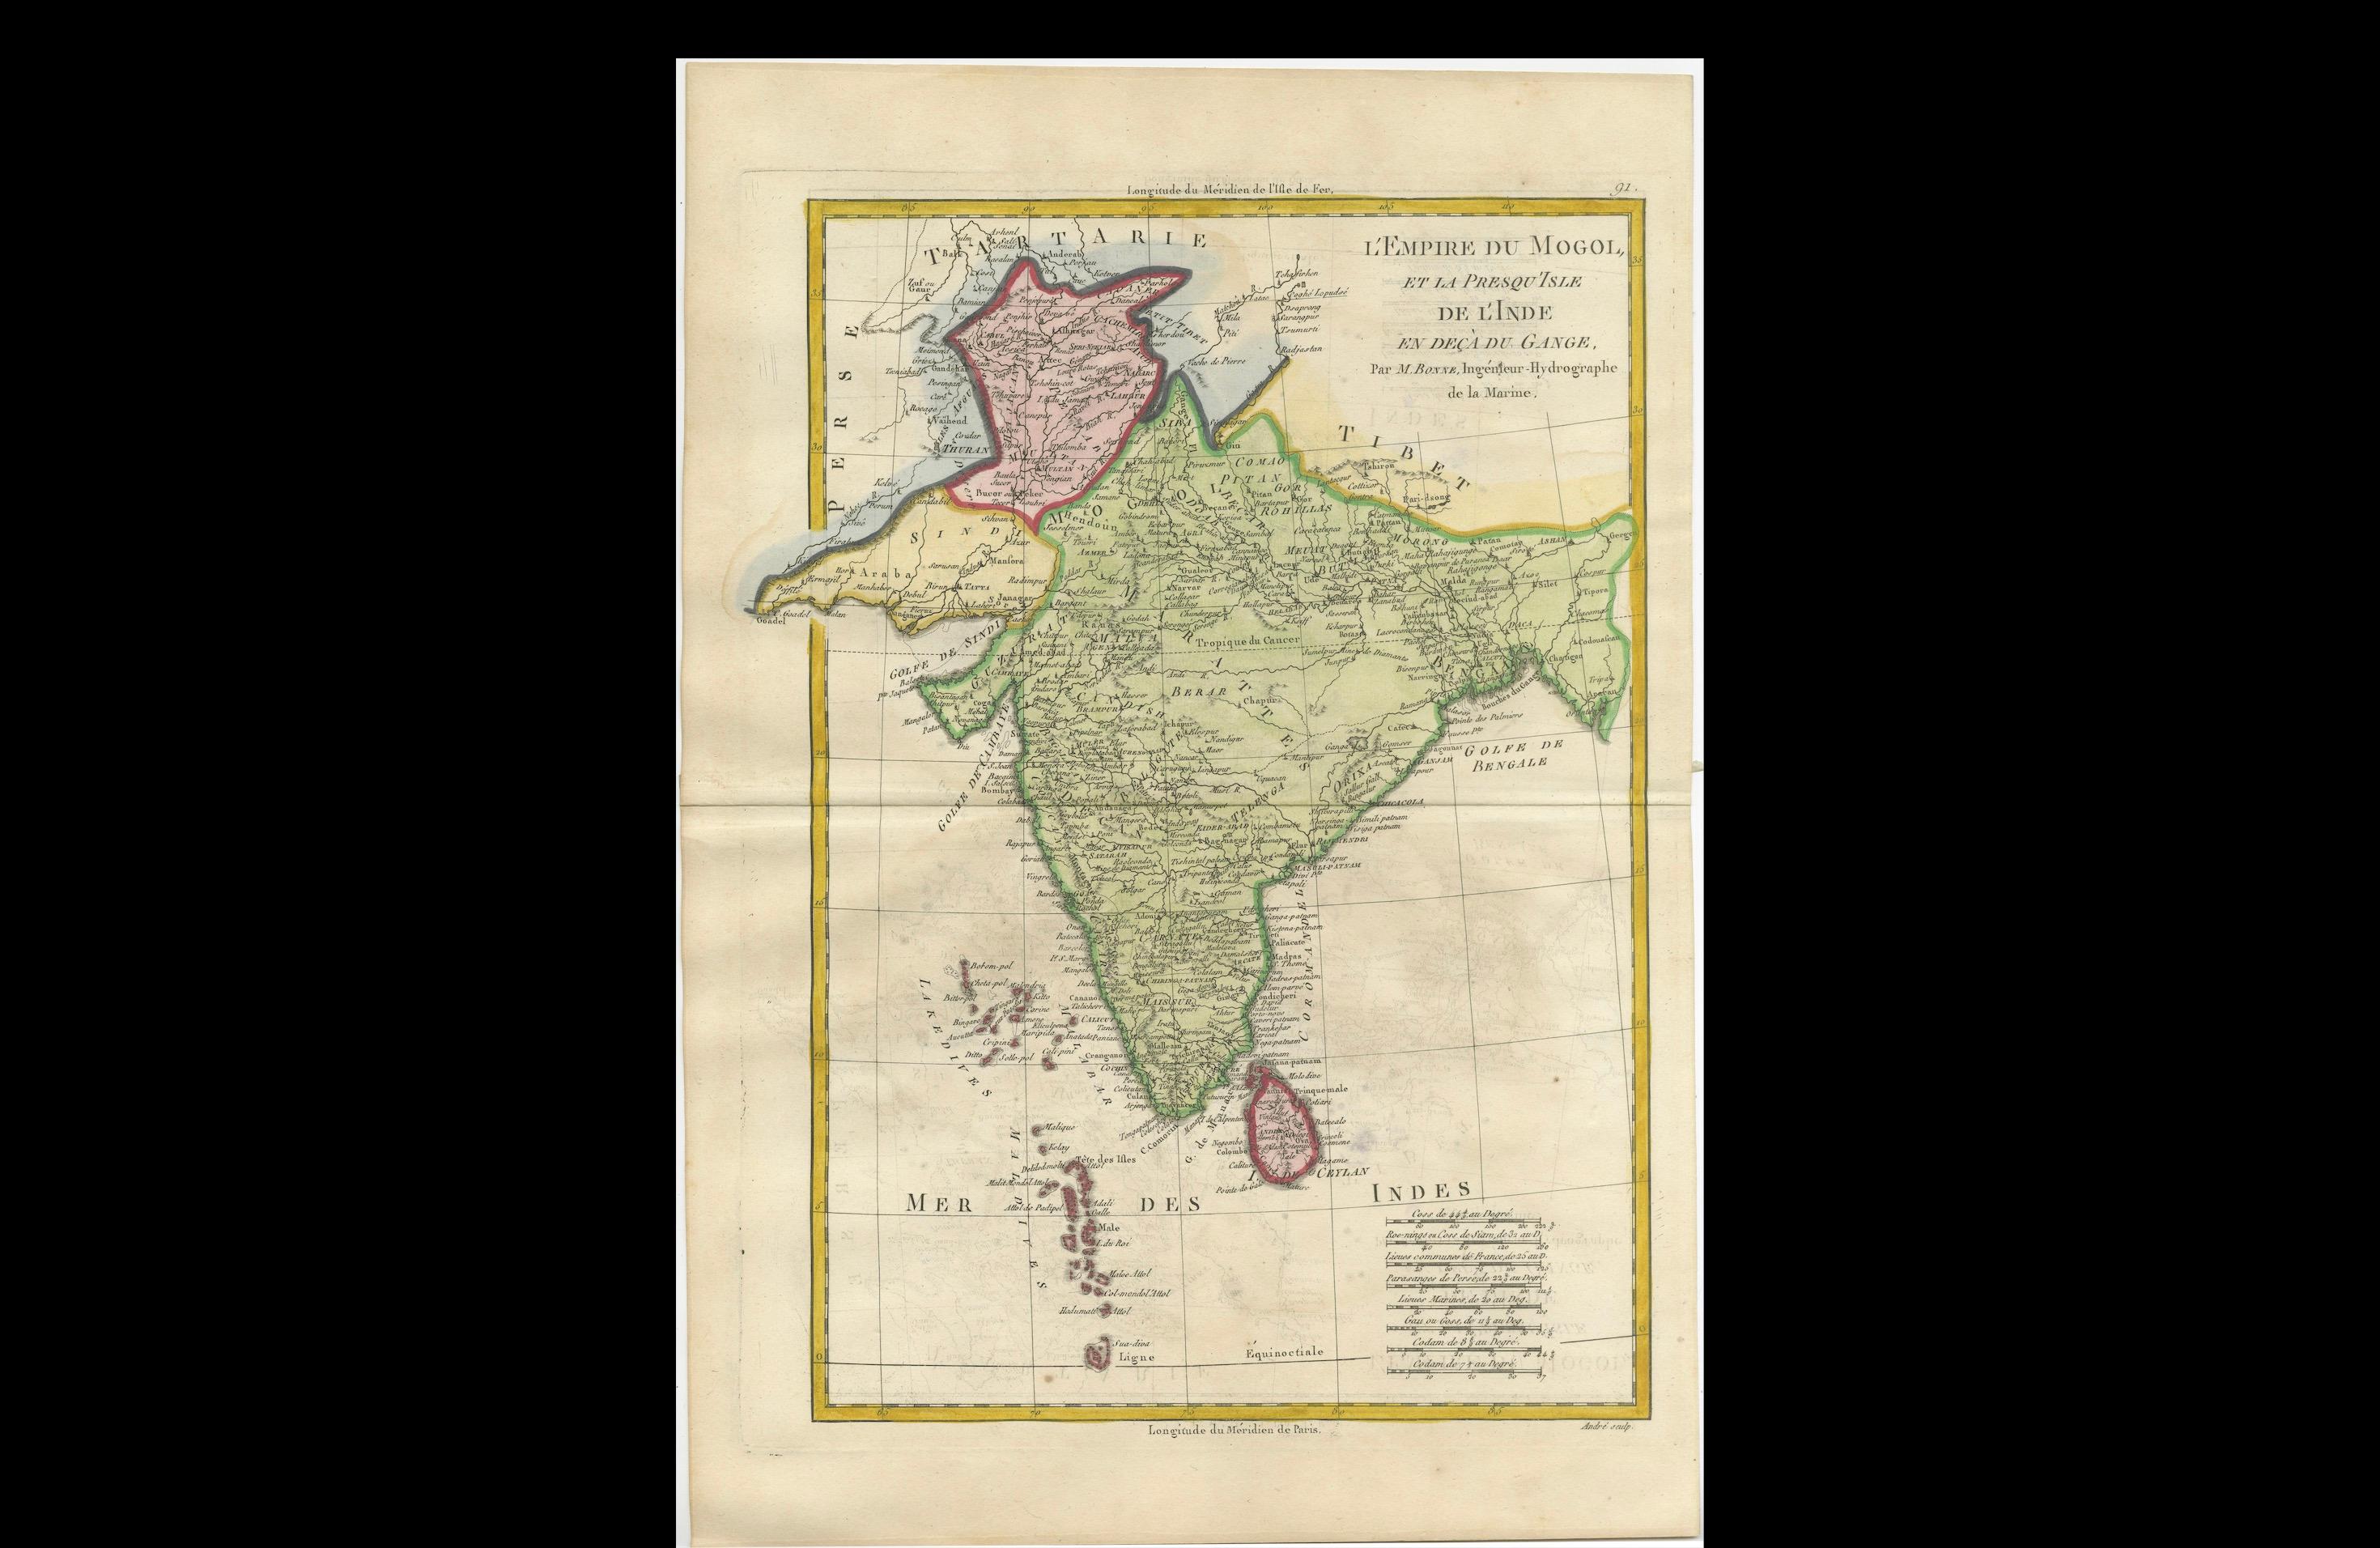 Old Map of The Mughal Empire and the Indian Peninsula South of the Ganges, 1787 For Sale 2